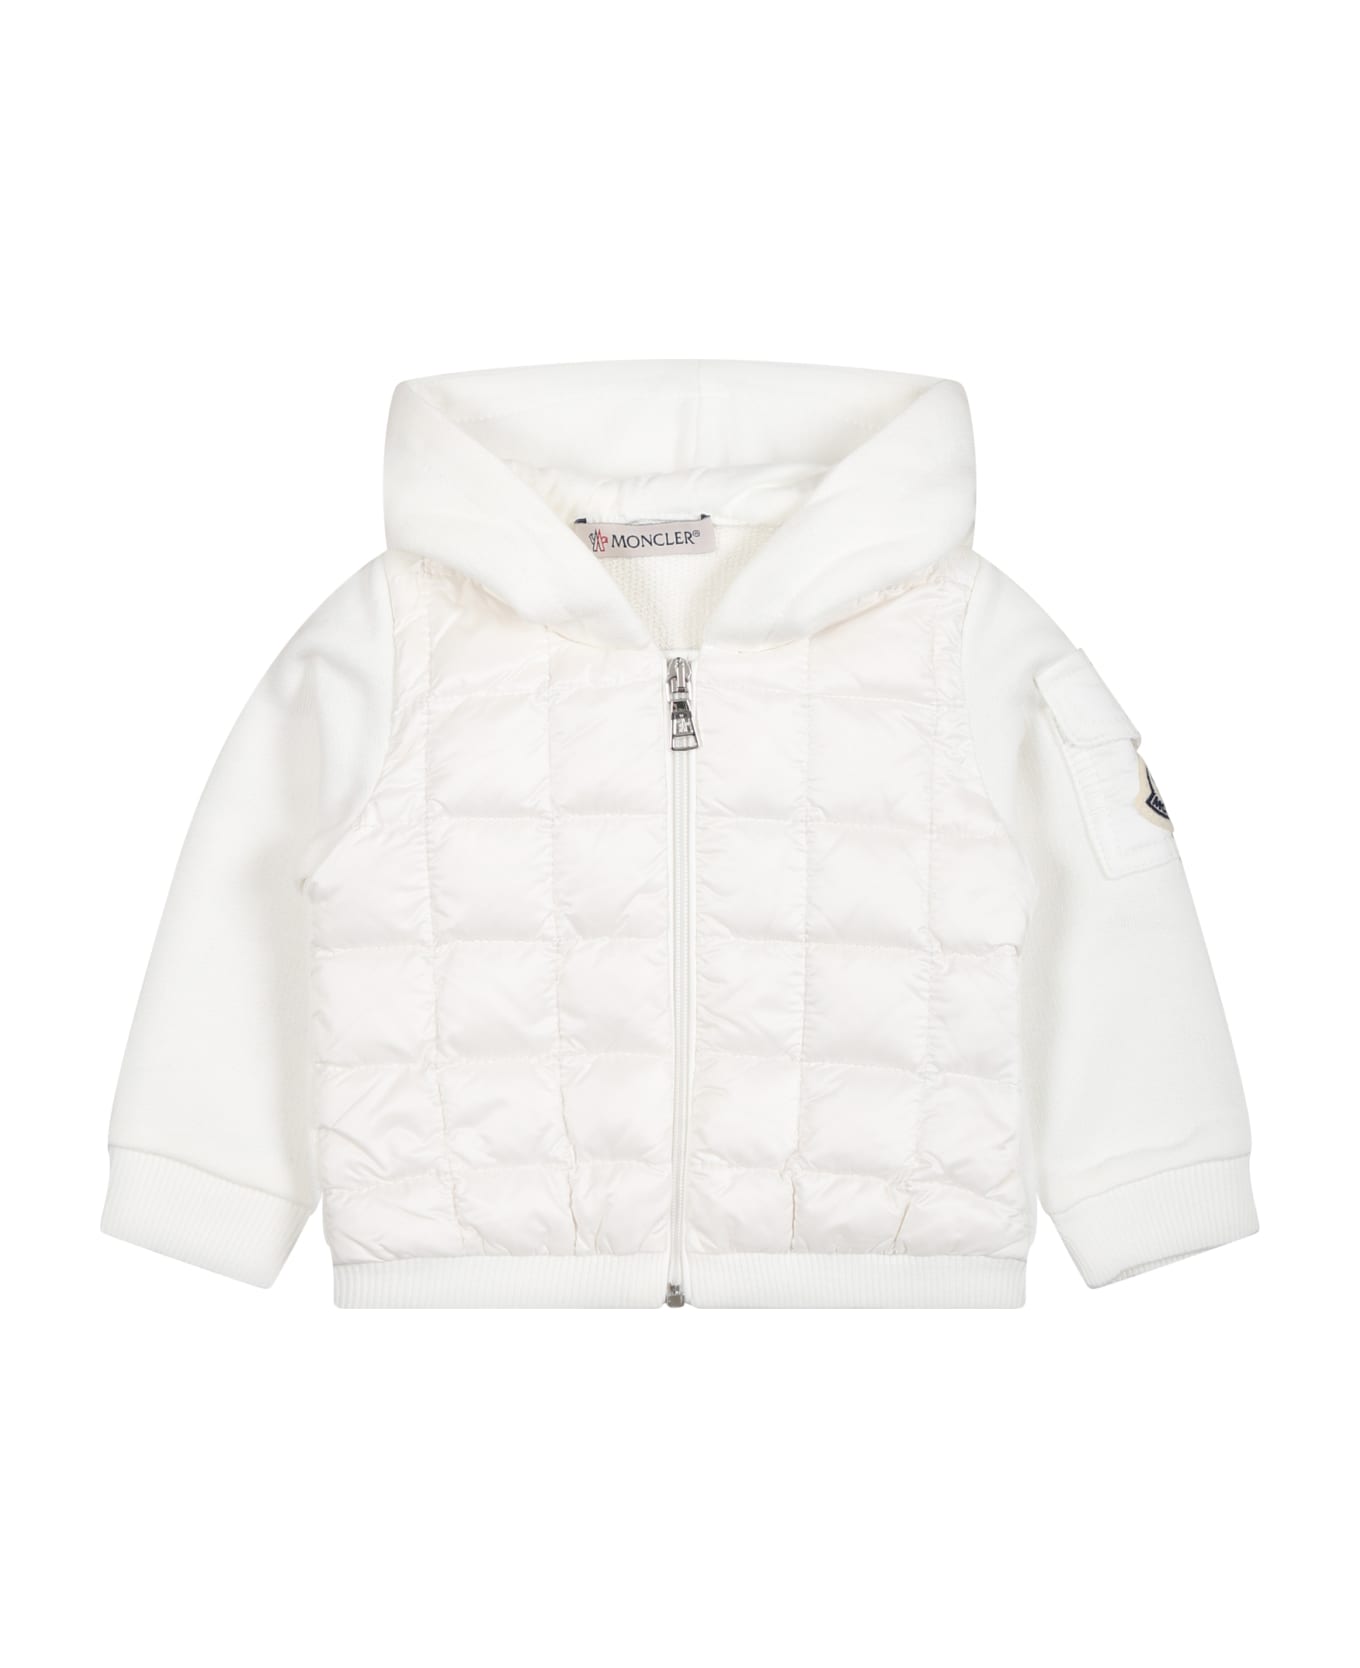 Moncler White Sweatshirt For Babies With Logo - White